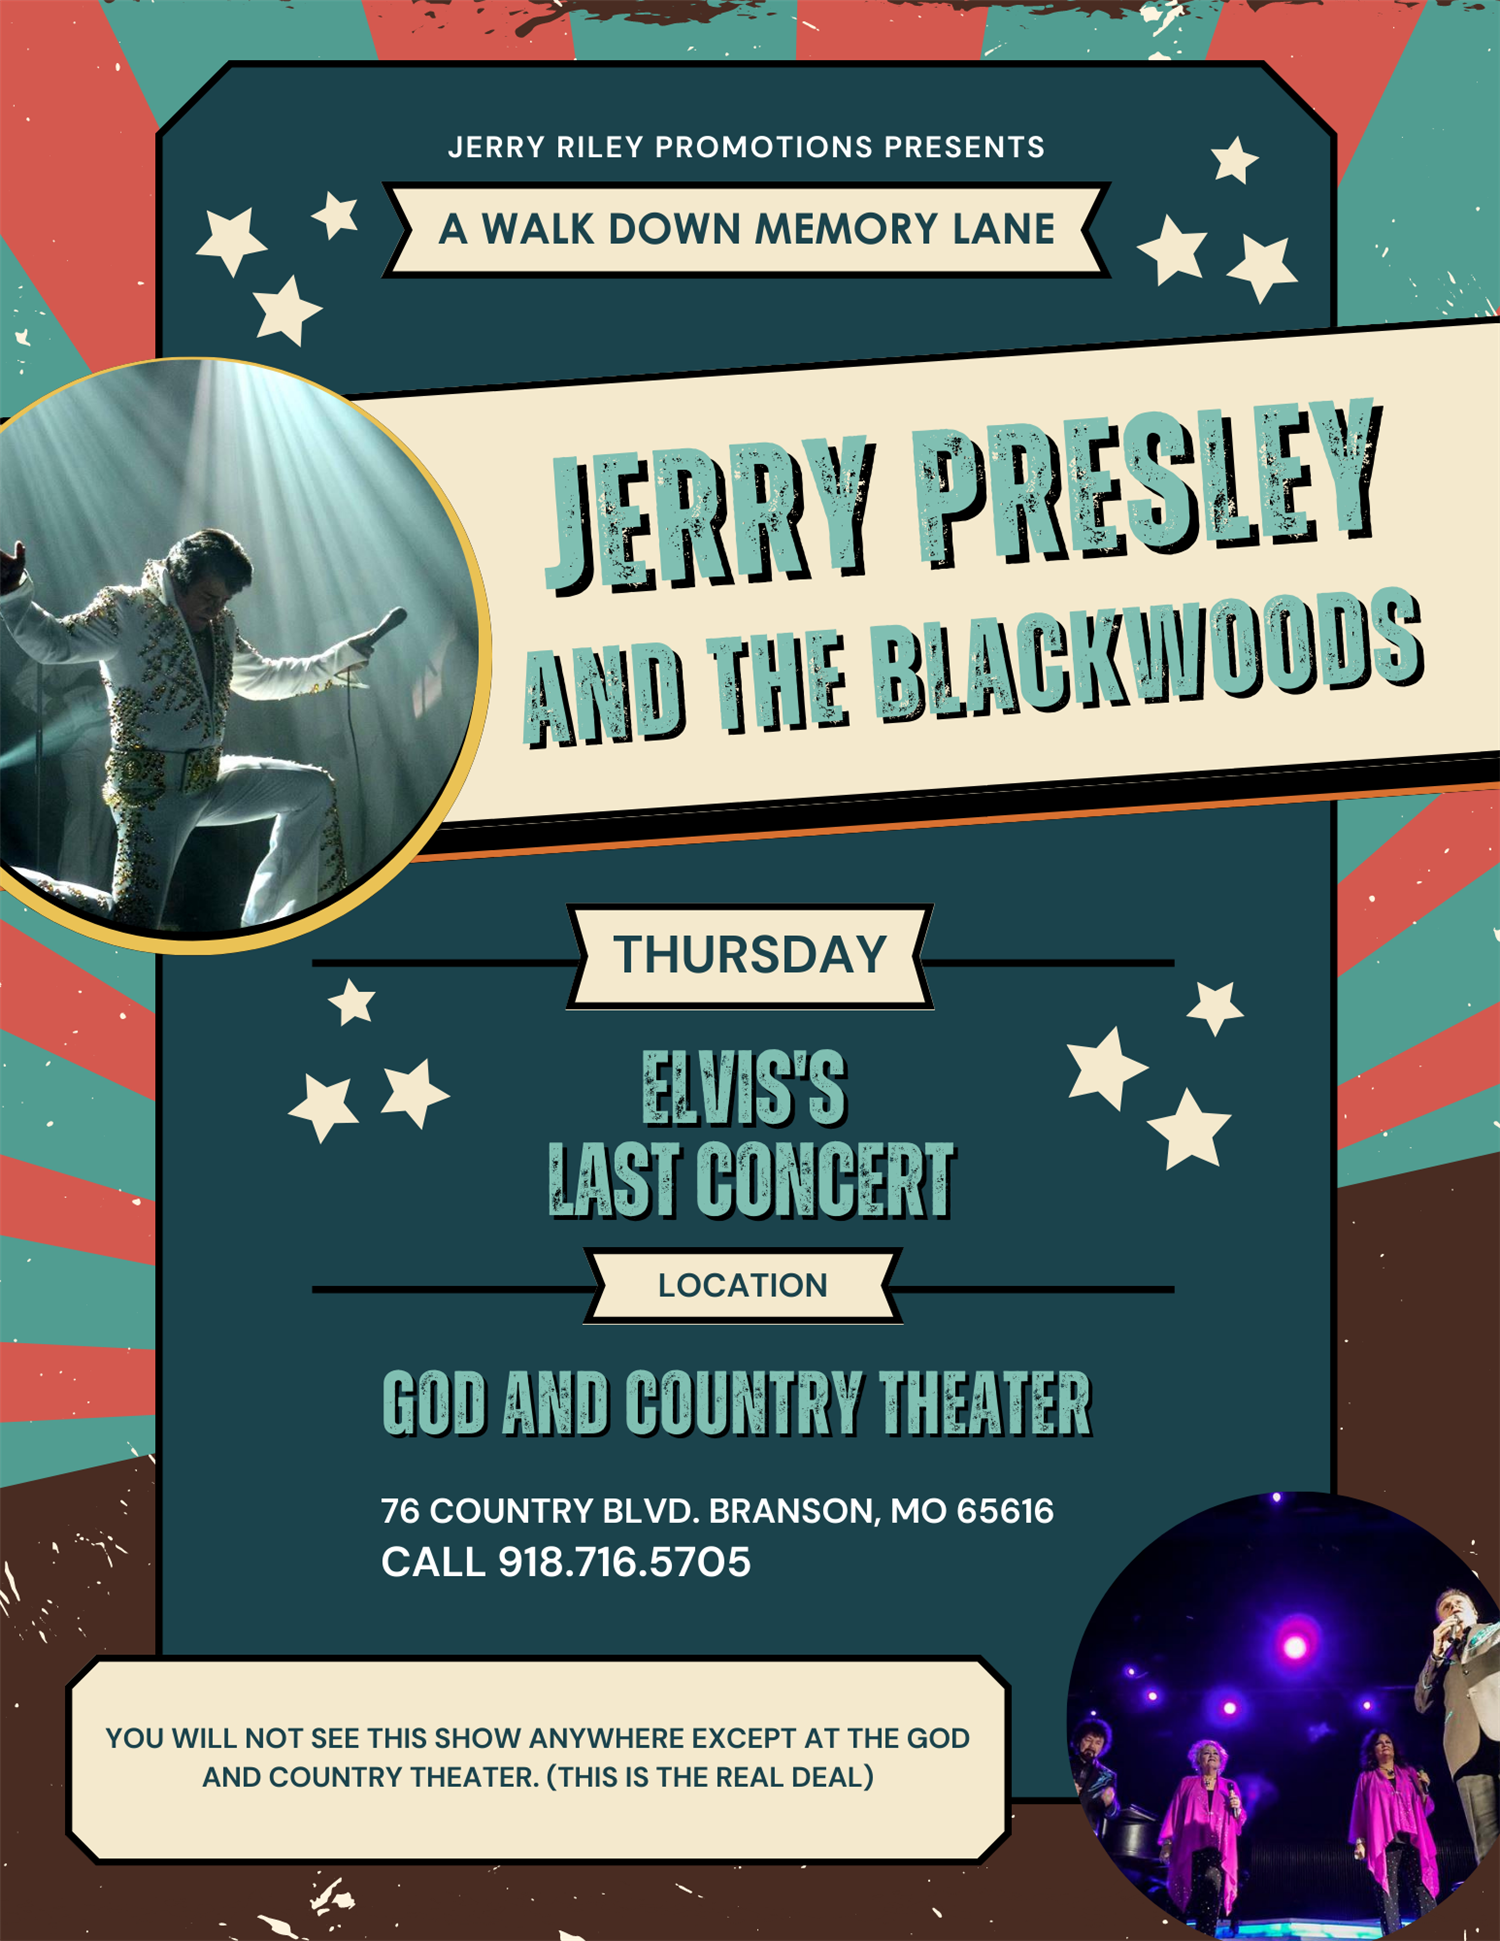 Jerry Presley & The Blackwoods Perform Elvis' Last Concert Every Thursday on Oct 02, 00:00@God and Country Theater - Pick a seat, Buy tickets and Get information on Jerry Riley Promotions 